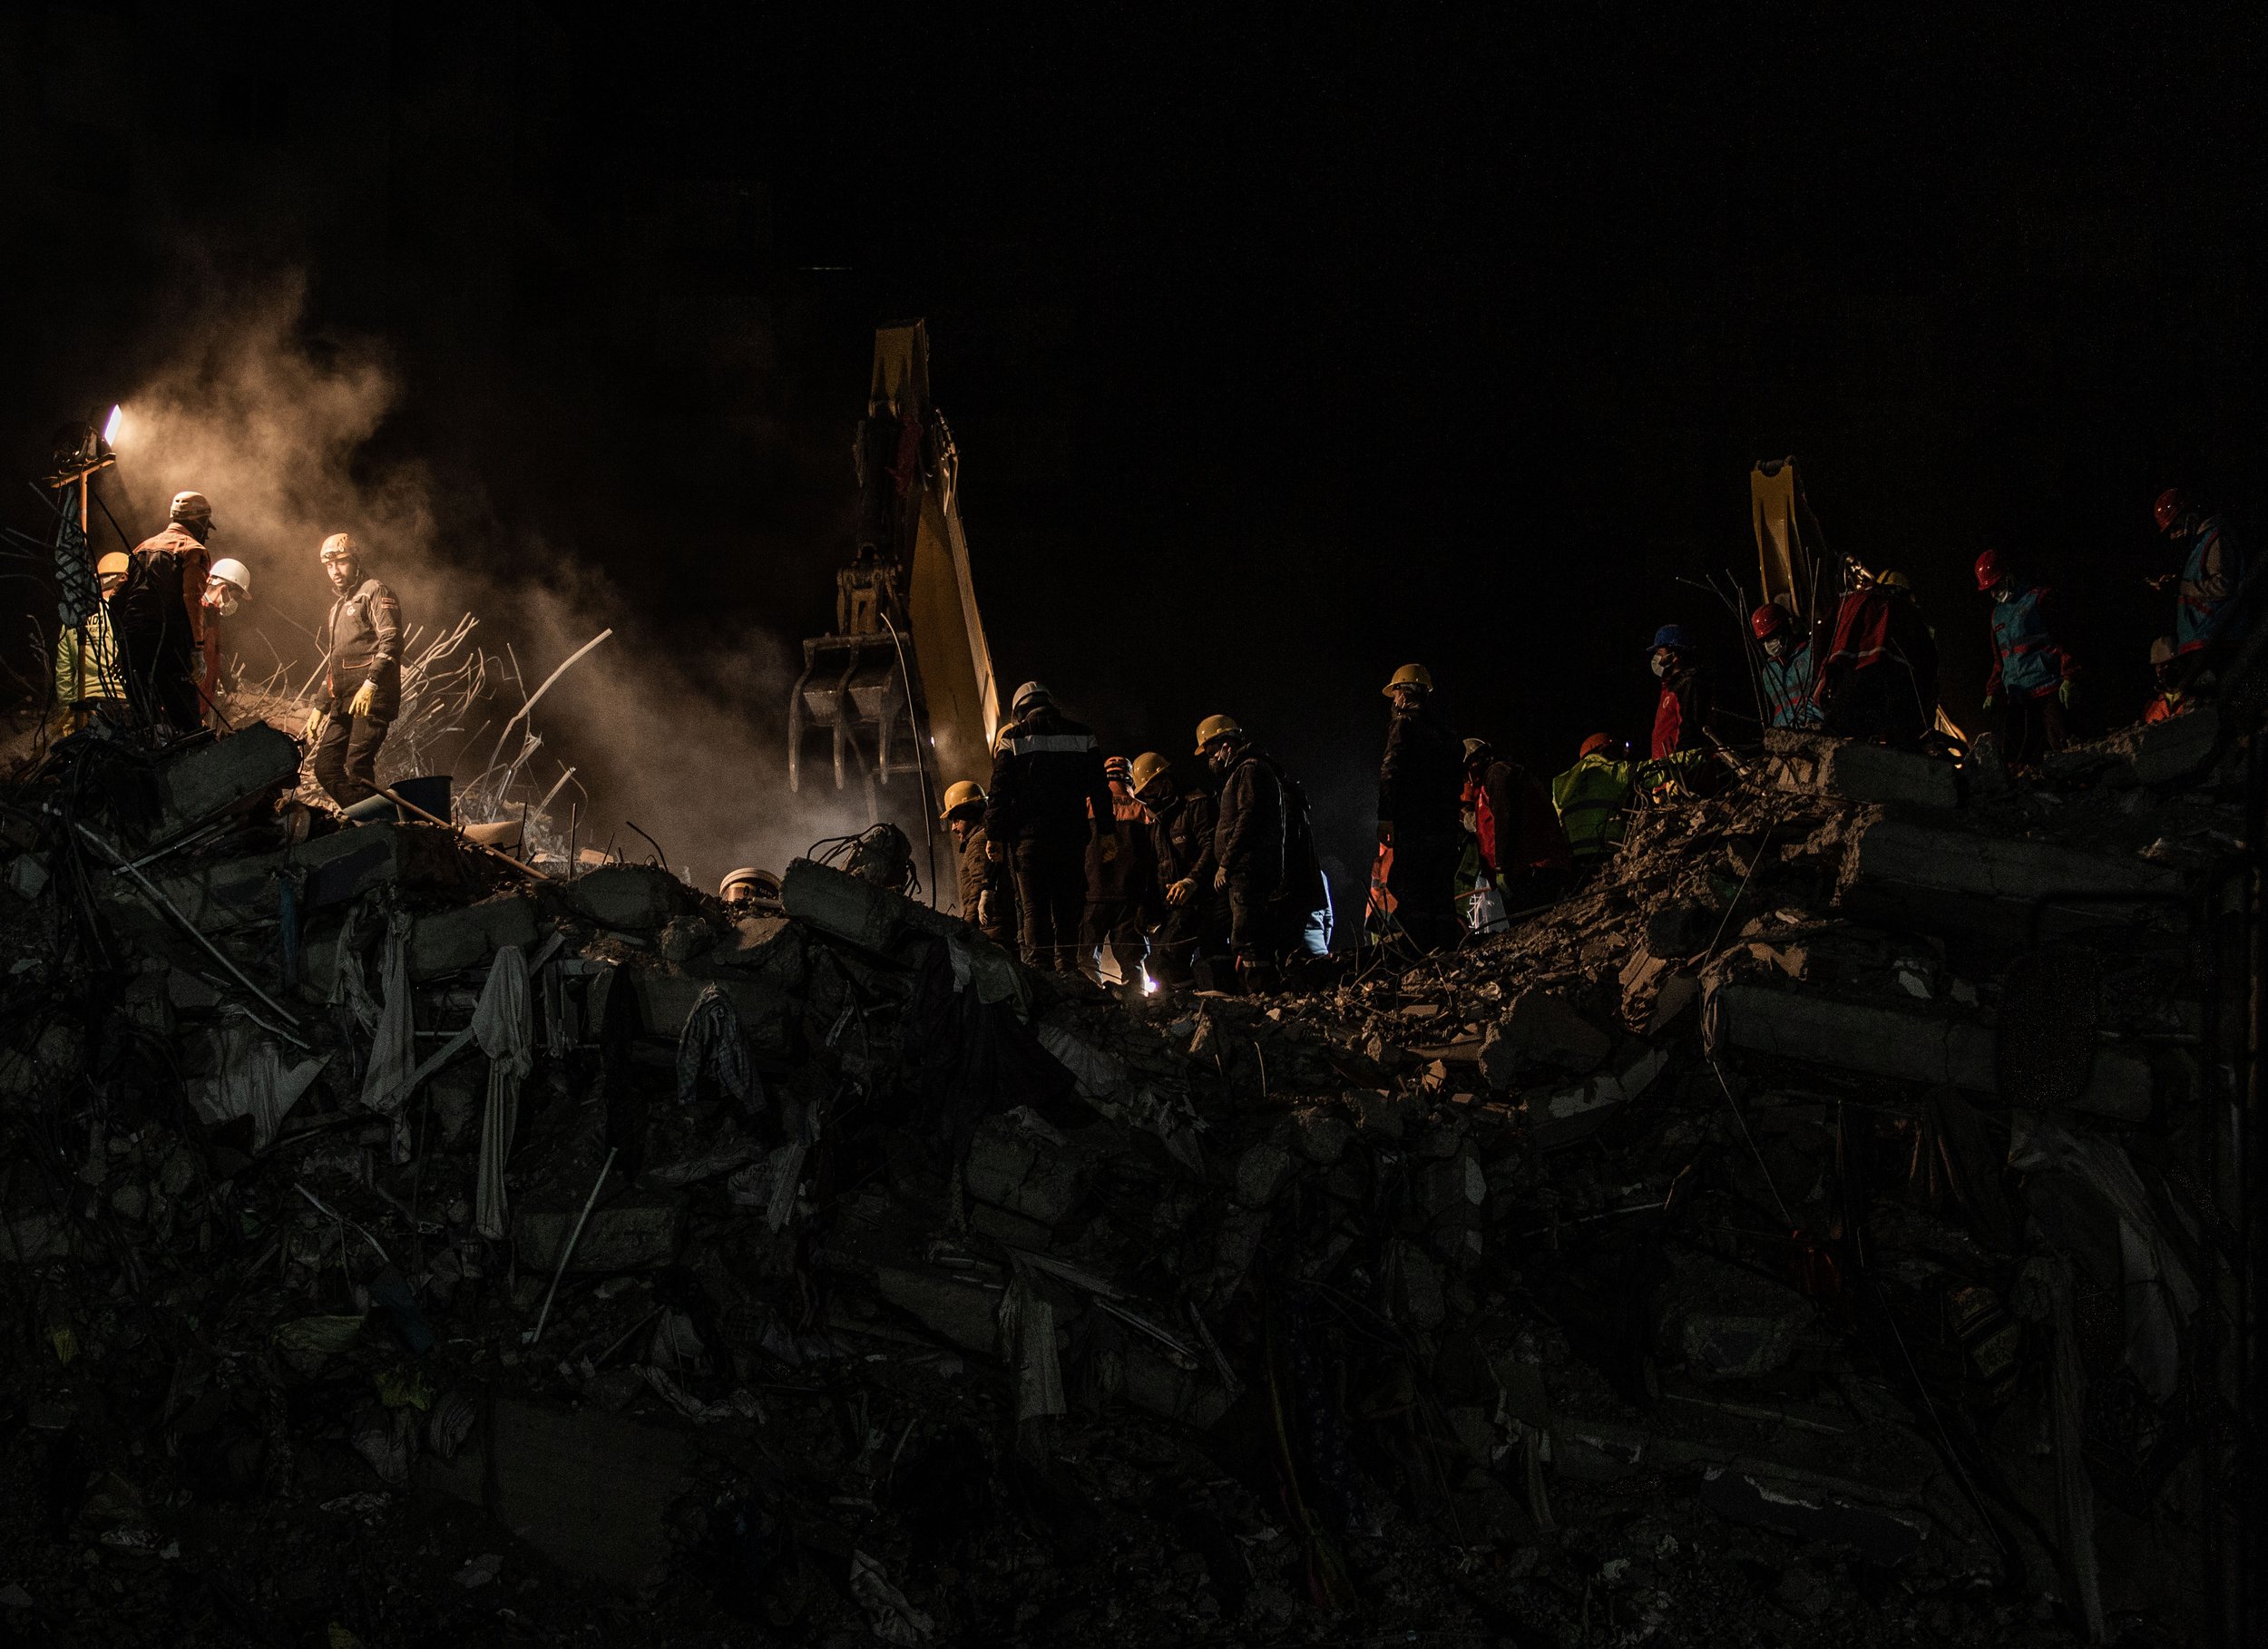  An evening search for the missing in Adana, Turkey on February 10, following the 7.8 and the 7.7 earthquakes that hit regions of Turkey on February 6, 2023. 